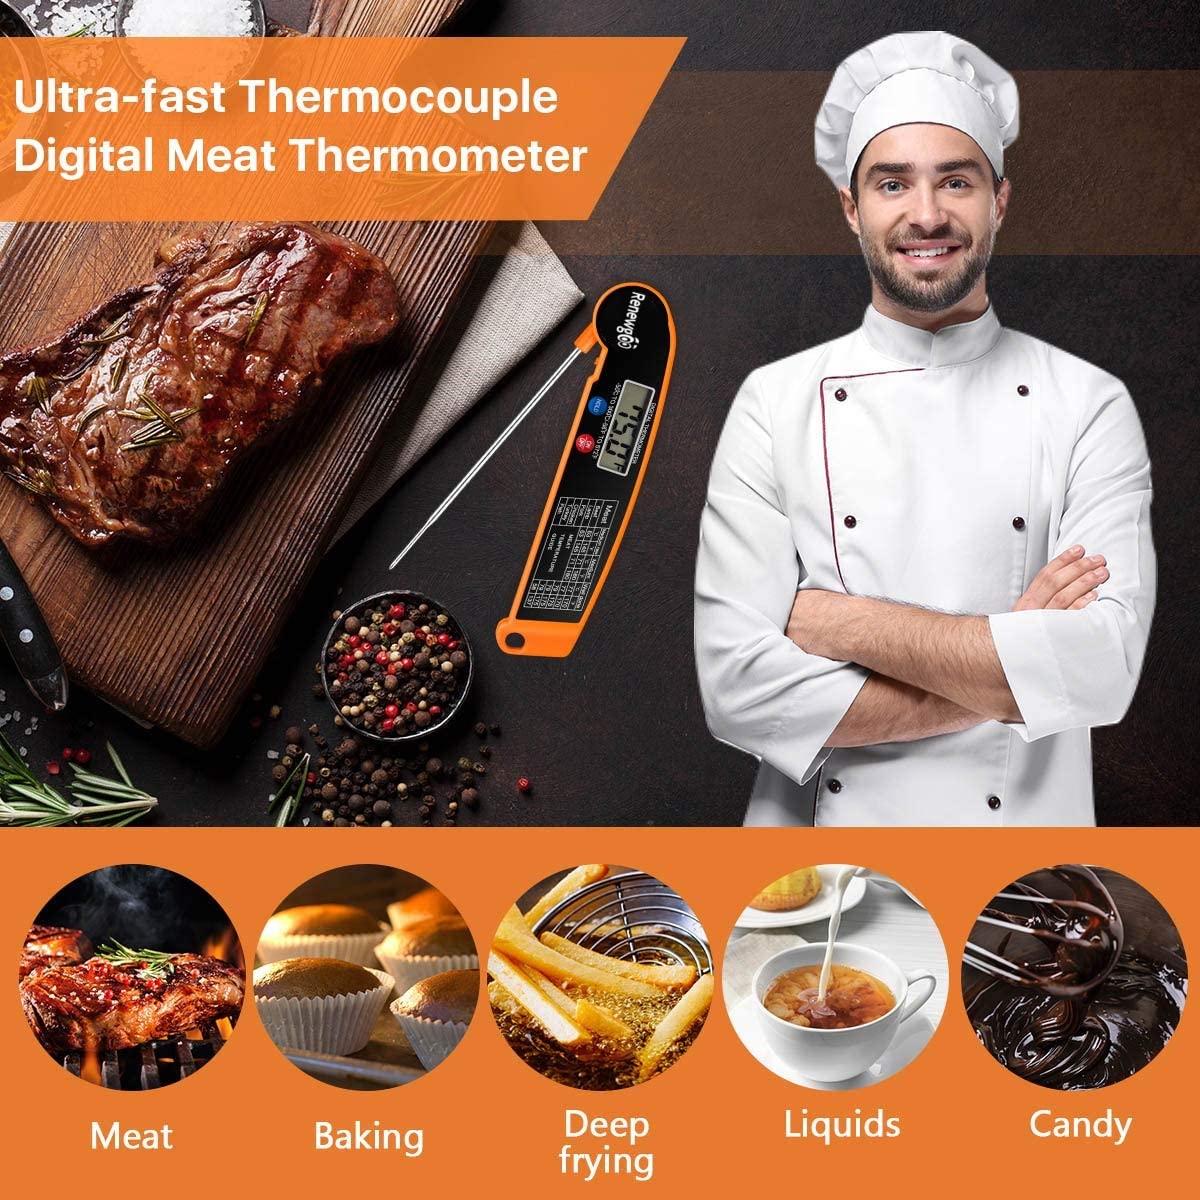 Smart-Home-Appliances-Food-Thermometer-Digital-Meat-Thermometer-for-Grilling-and-Cooking-Fast-Instant-Read-Thermometer-Kitchen-Cooking-Food-Thermometer-for-Candy-Water-Oil-20